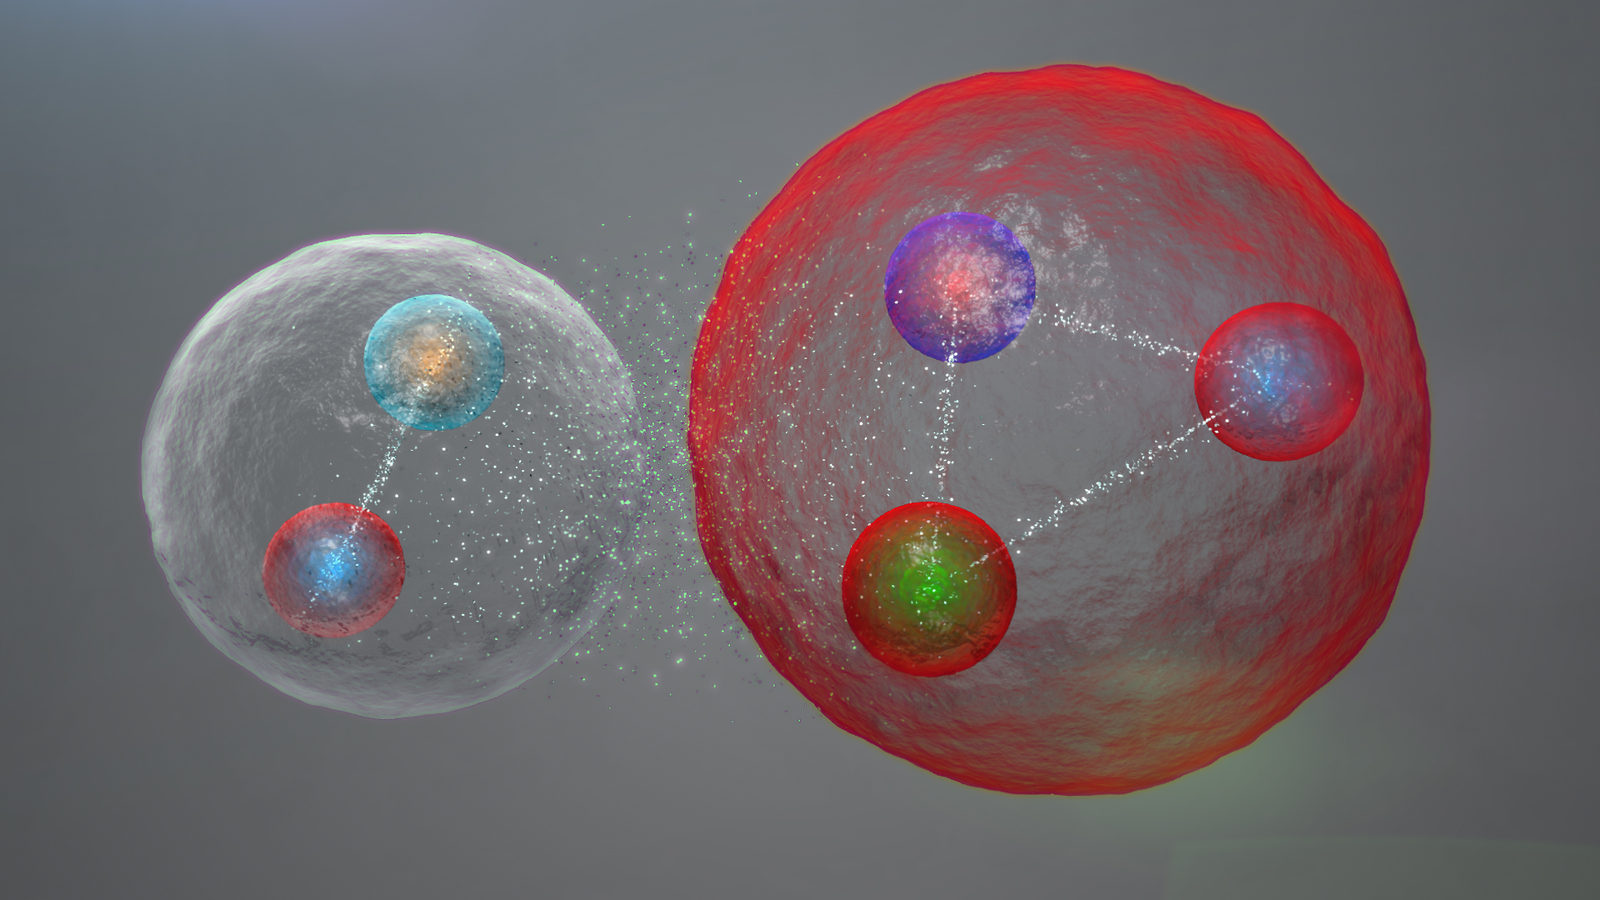 Illustration showing the pentaquark as a molecule